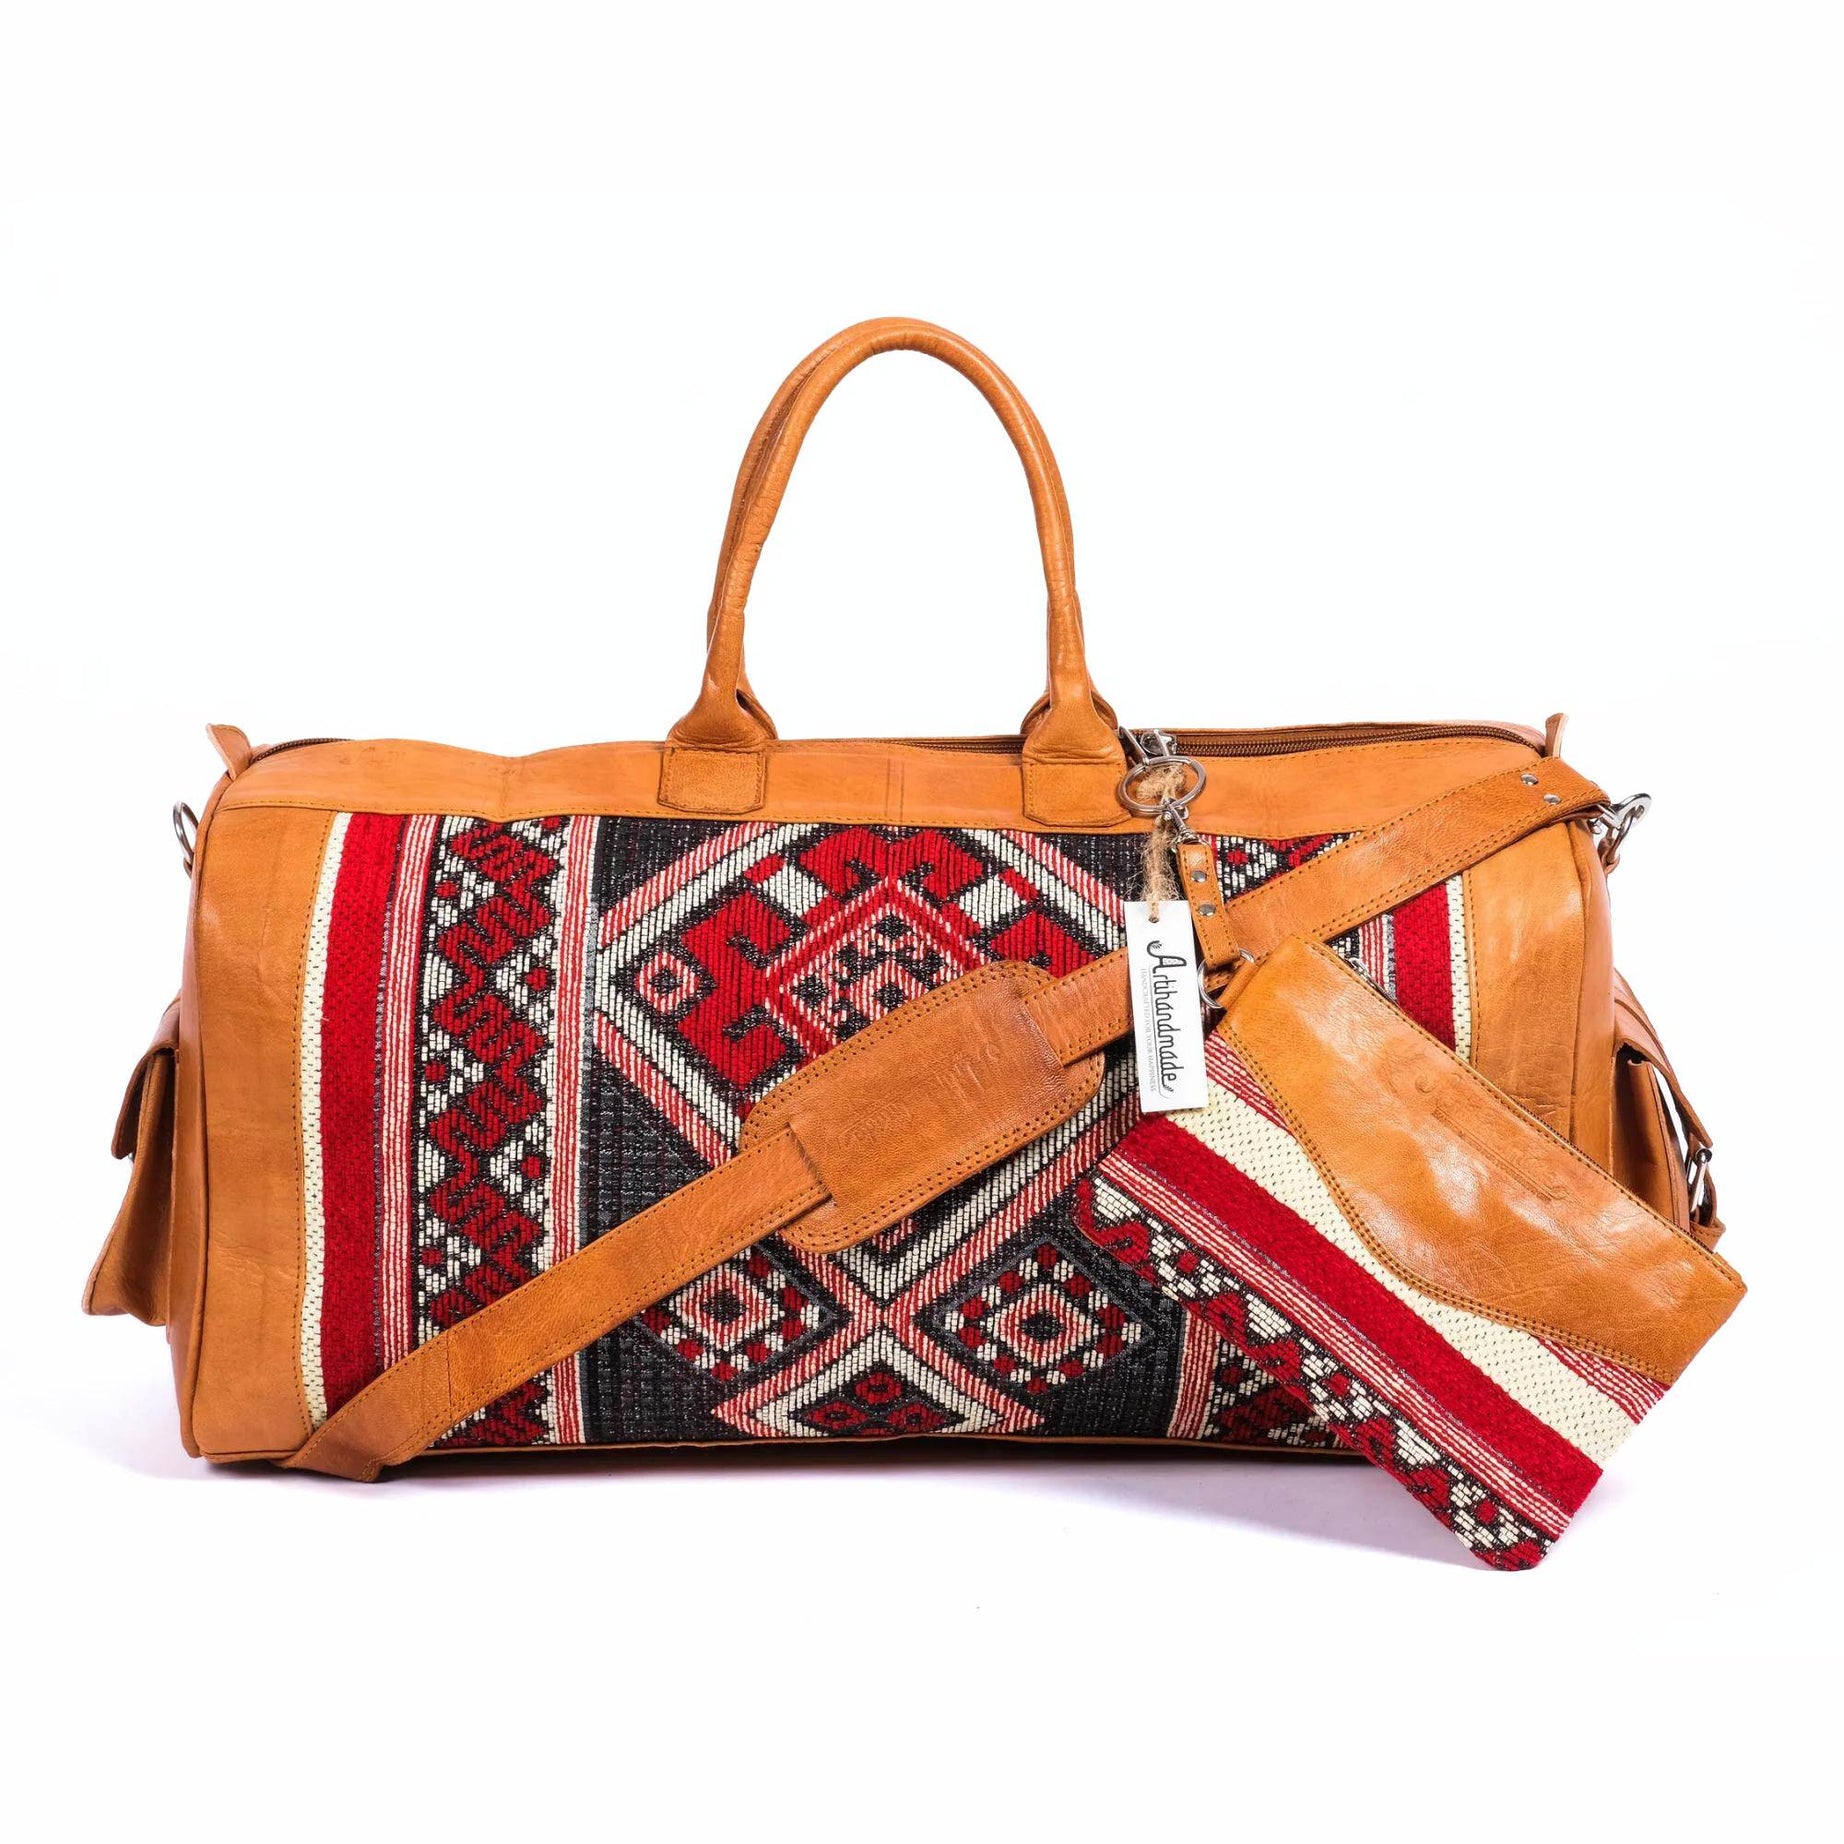 Leather Kilim Travel Bag With Wallet - Cognac And Almond Leather